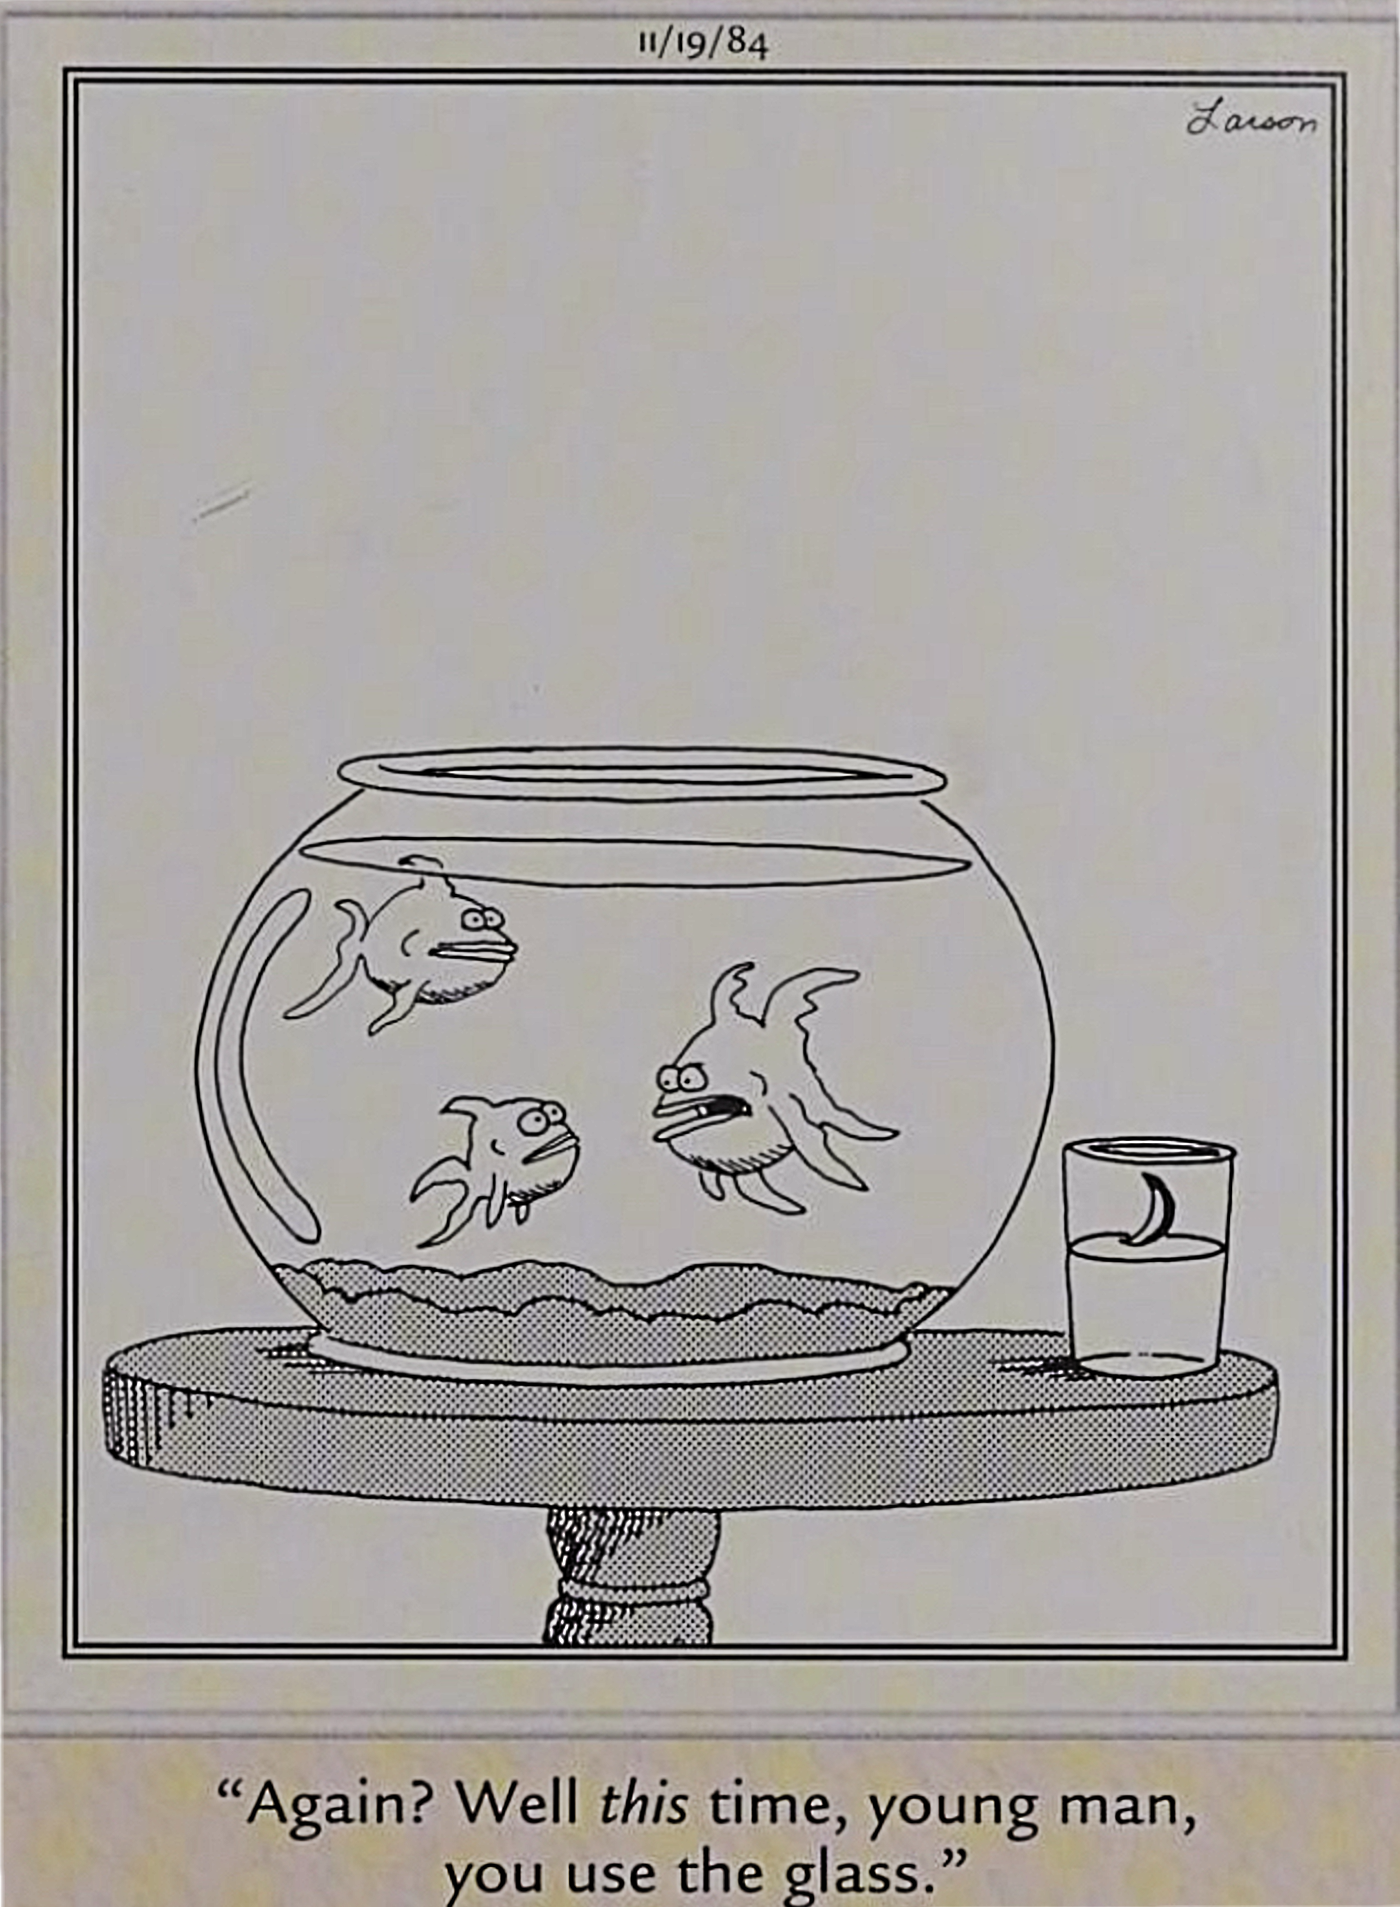 Far Side, young fish being potty trained